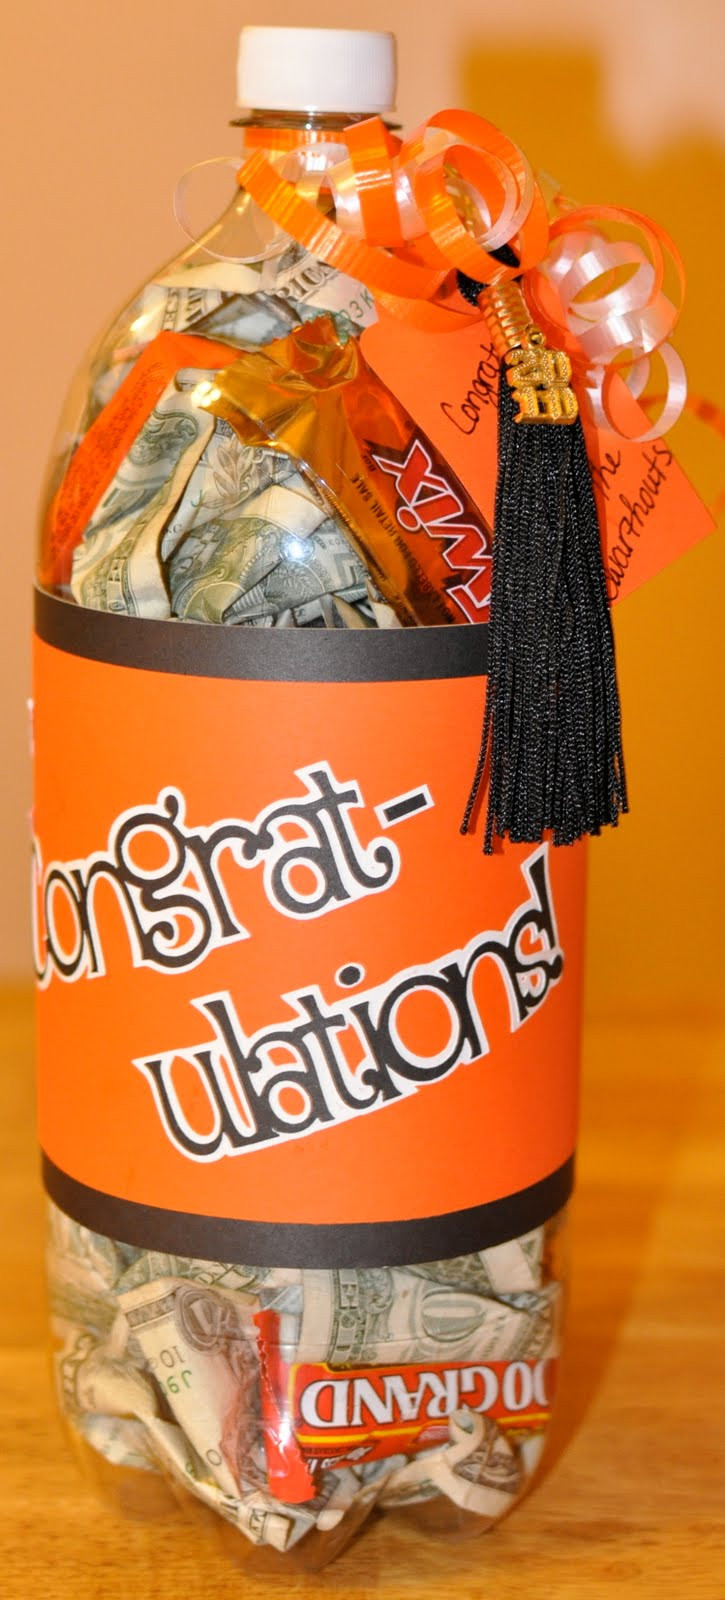 Graduation Gag Gift Ideas
 give money as a t sunday shout outs A girl and a